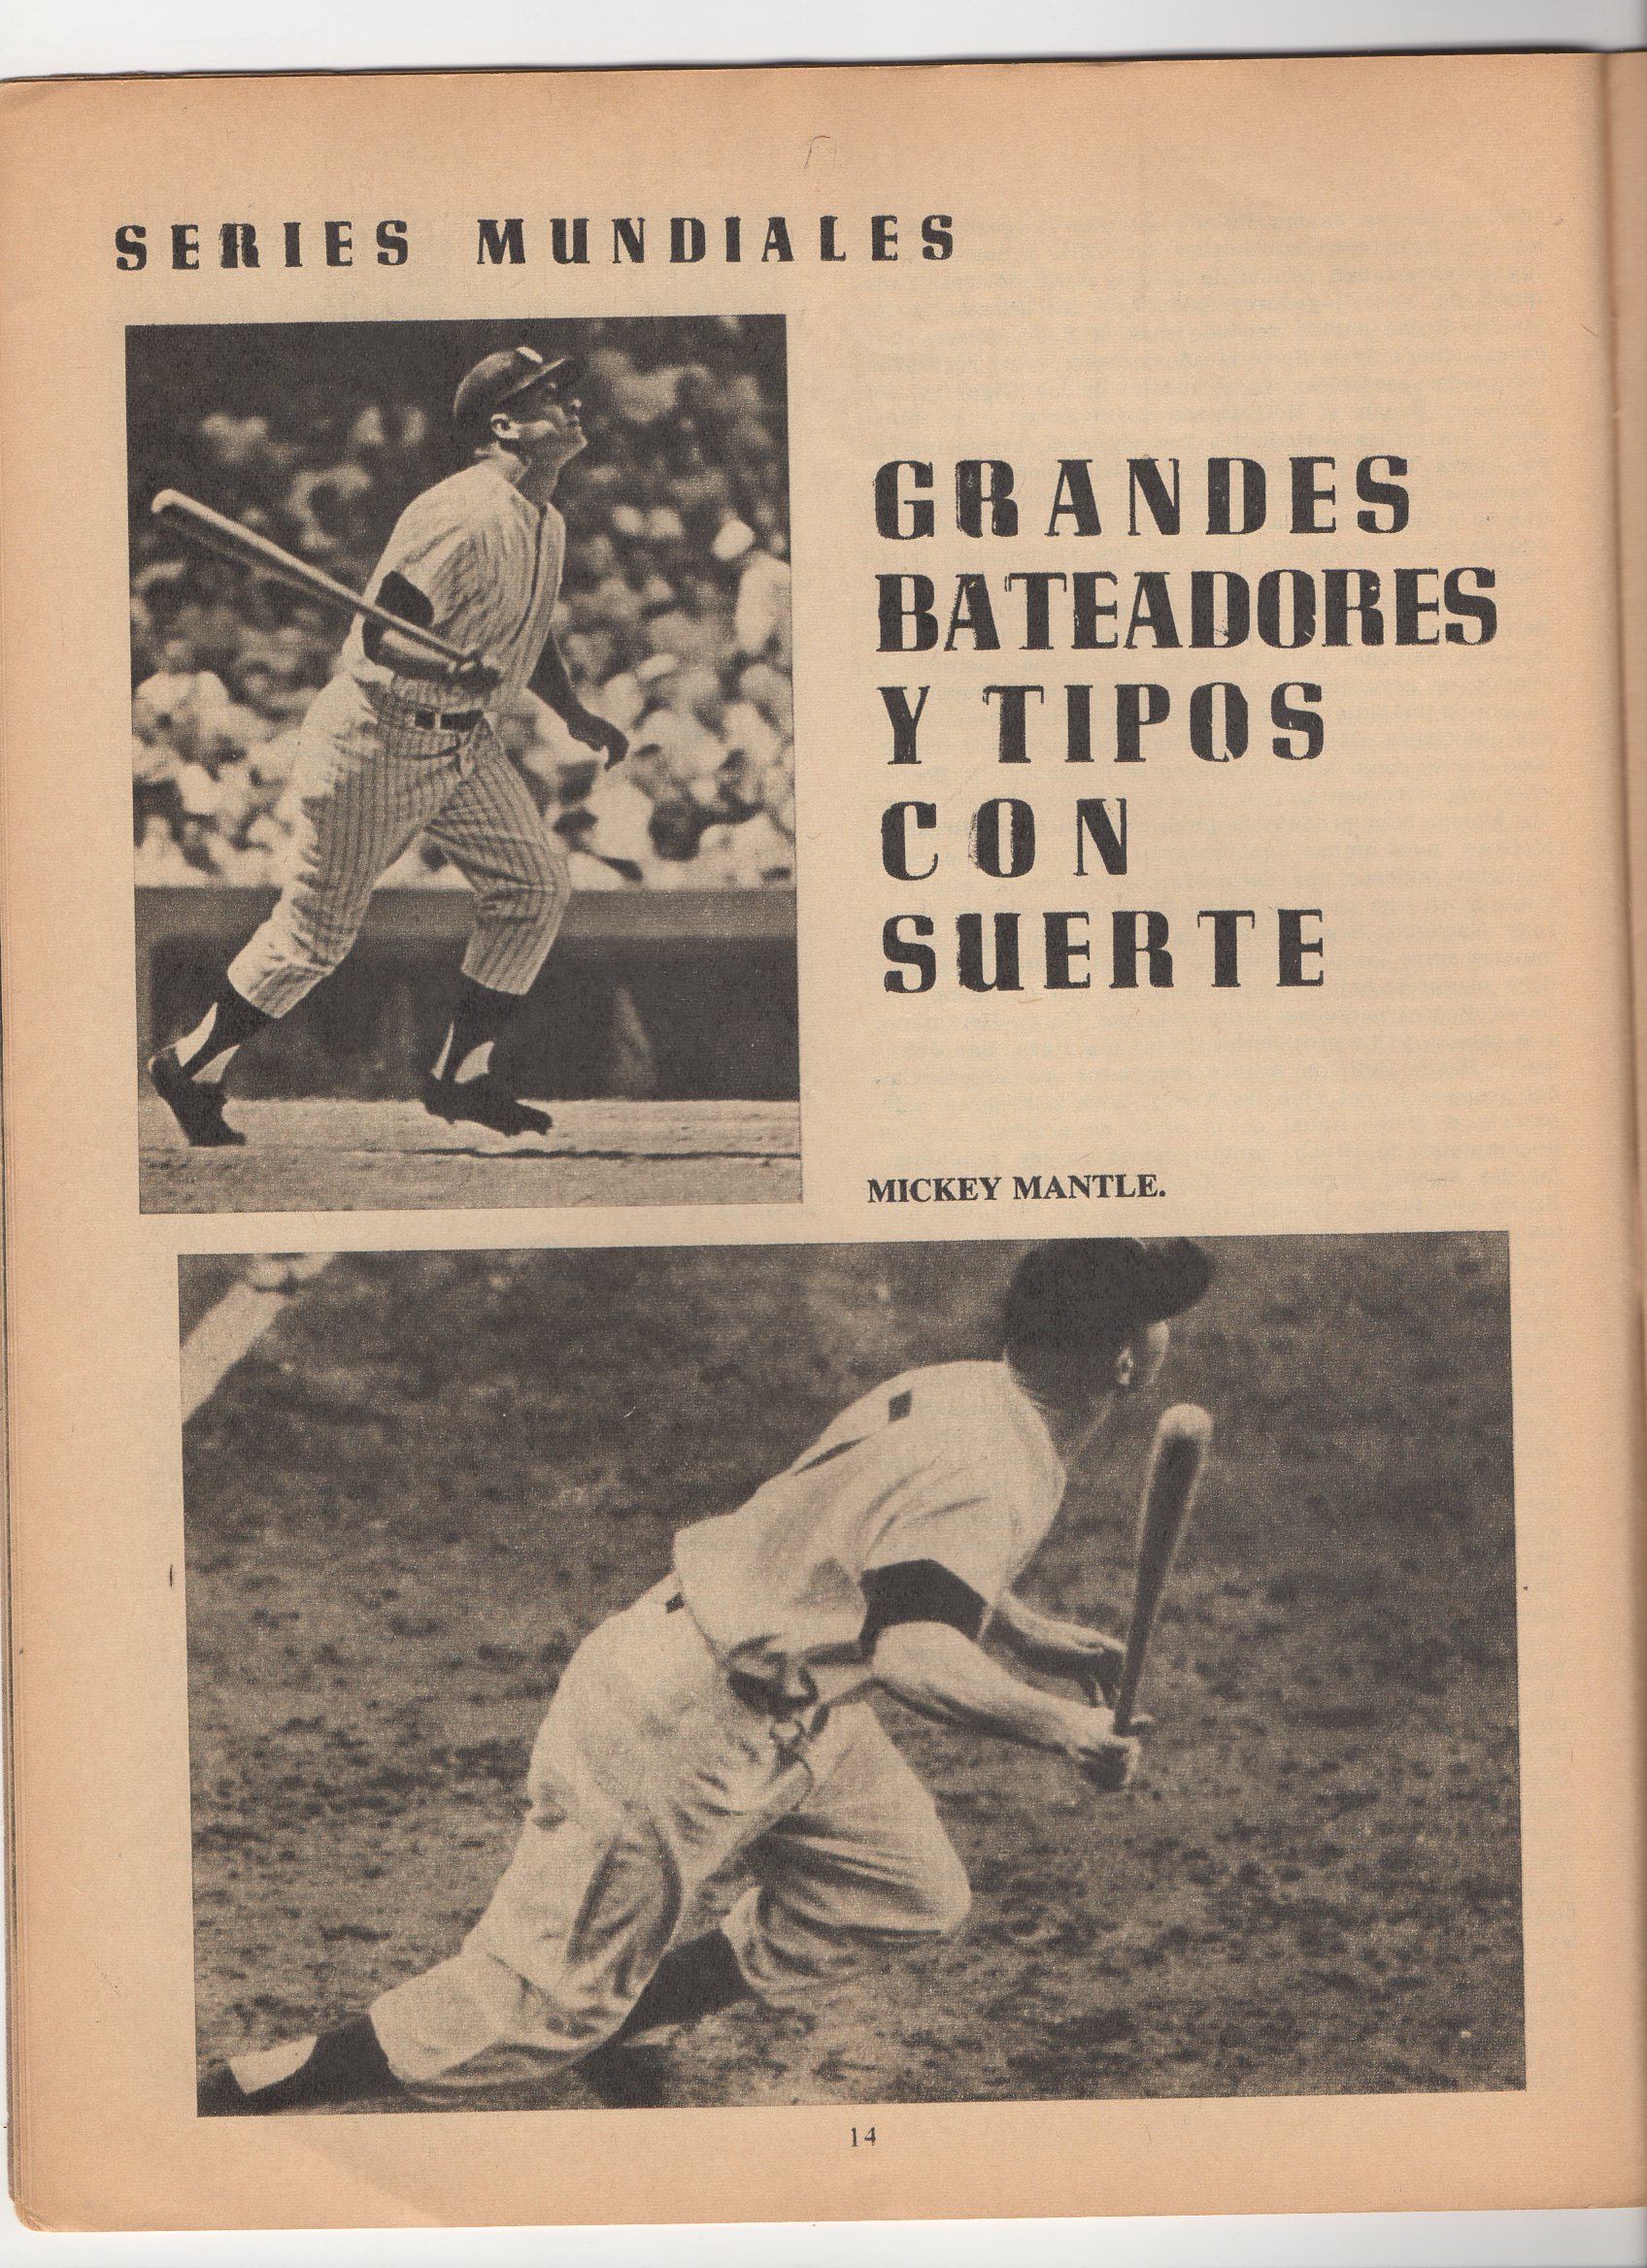 1961 serie mundial, mexico, number 43, 11/1961